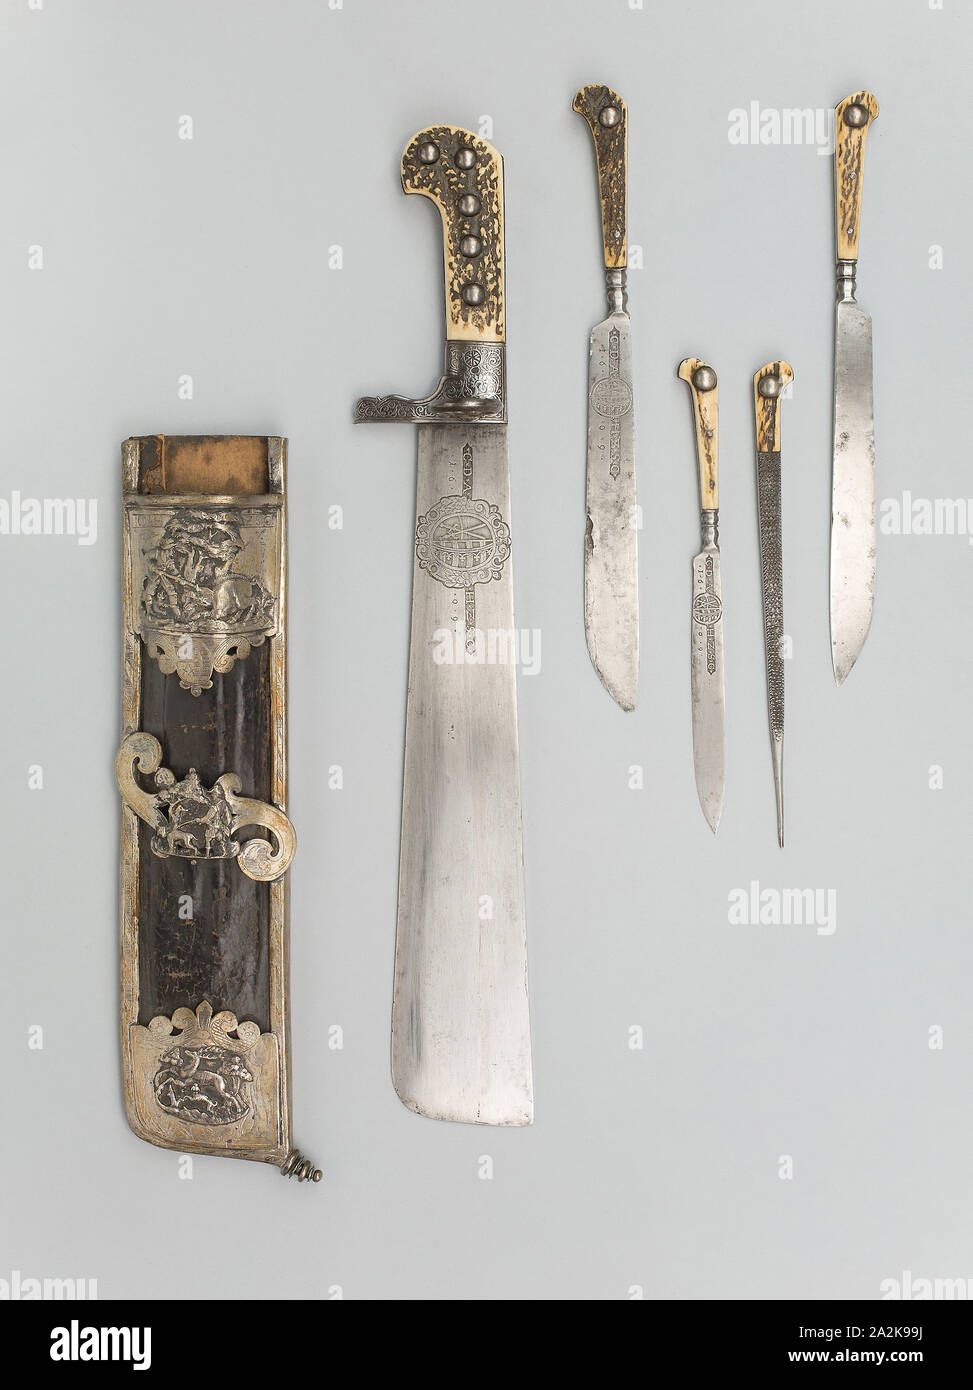 Hunting Trousse (Waidpraxe) with the Coat of Arms and Initials of Christian II, Elector of Saxony, 1609, German (Saxony), Dresden, Silversmith: Joachim Puttlost, active 1607-1652, Germany, Steel, iron, silver, gilding, staghorn, wood, and leather, Cleaver L. 47 cm (18 1/2 in.), Blade L. 32.8 cm (12 7/8 in.), Wt. 2 lb Stock Photo